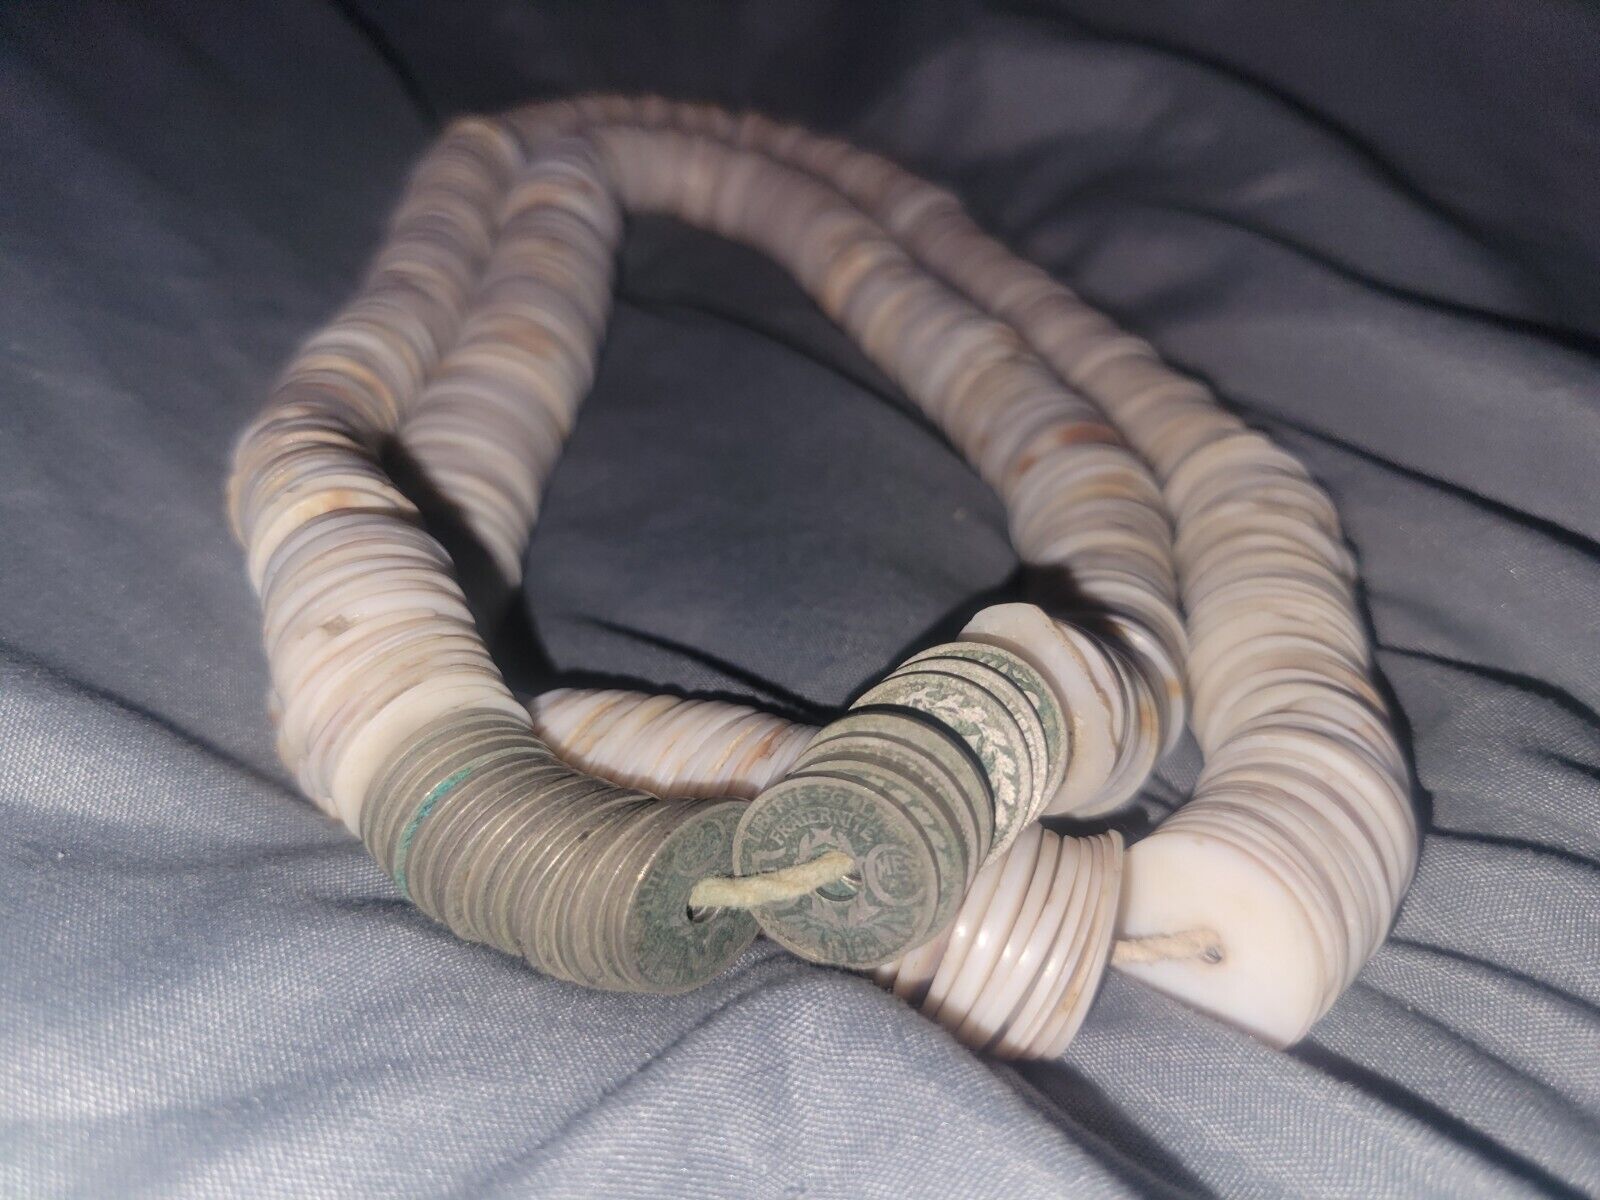 Rare Antique Conch Shell & 1920's 5C Coins Necklace African Tribal Mid 1900's...